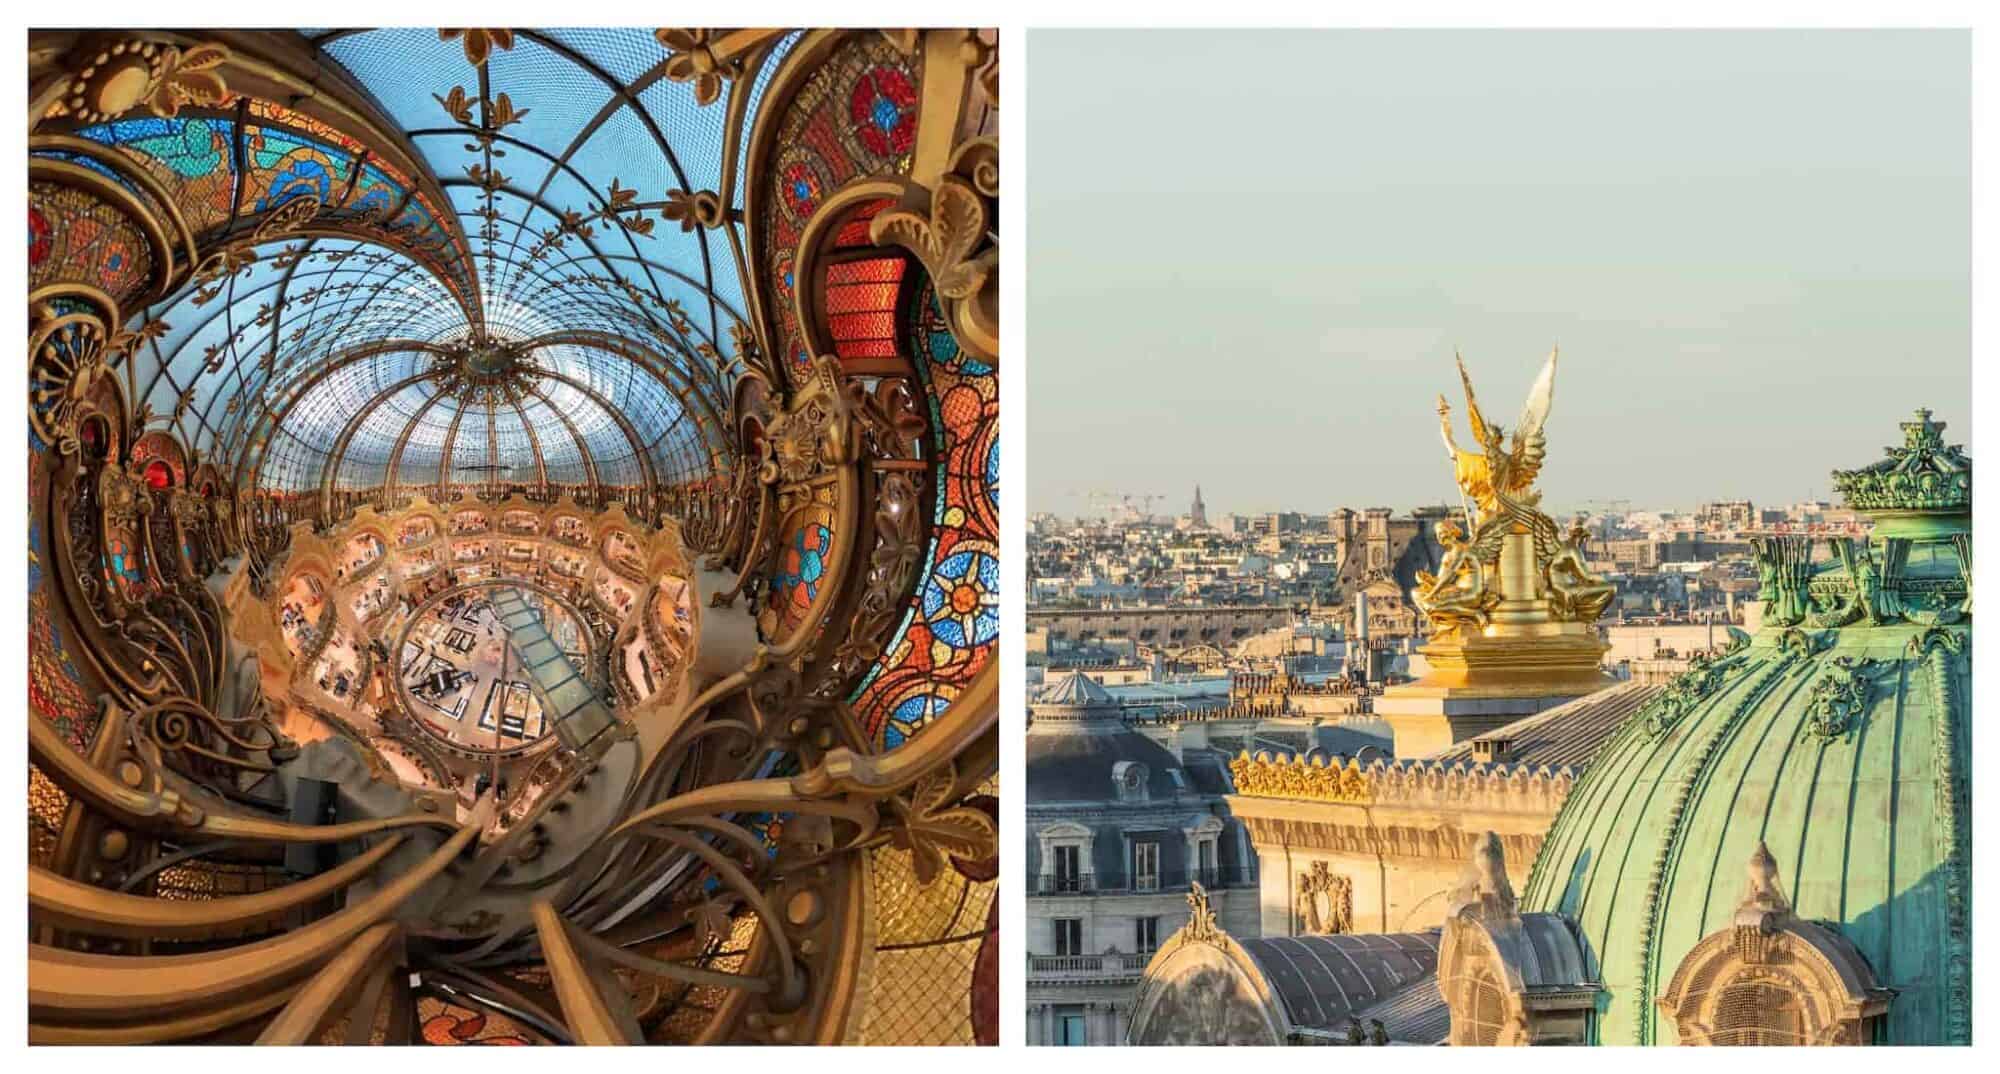 Left: a stunning view from the cupola down towards the ground floor of Galeries Lafayette; right: a gold statue viewed from the rooftop terrace of Galeries Lafayette with panoramic views.